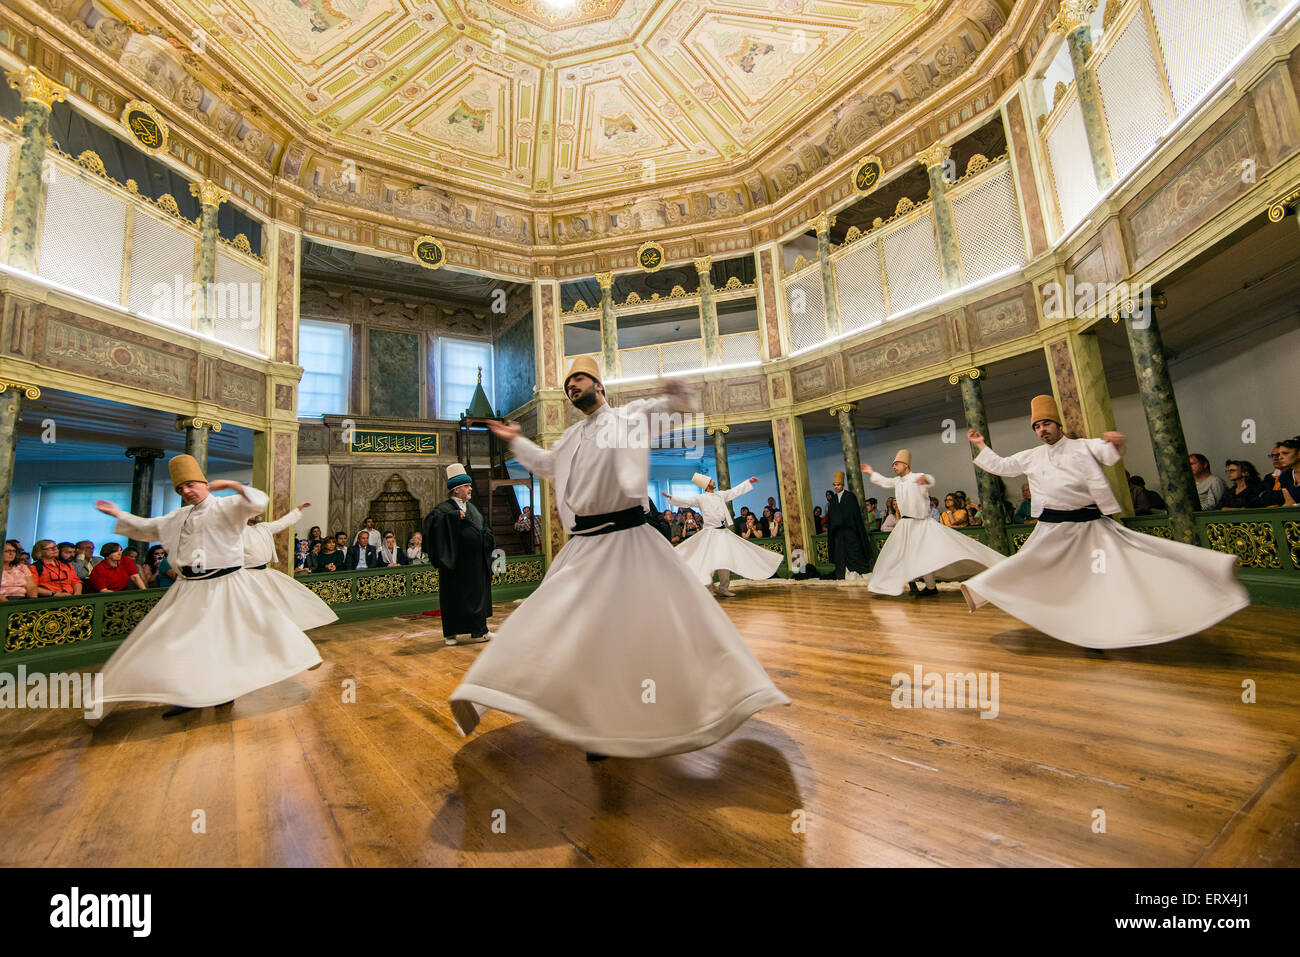 Whirling dervishes performing at Galata Mevlevi Museum, Istanbul, Turkey Stock Photo